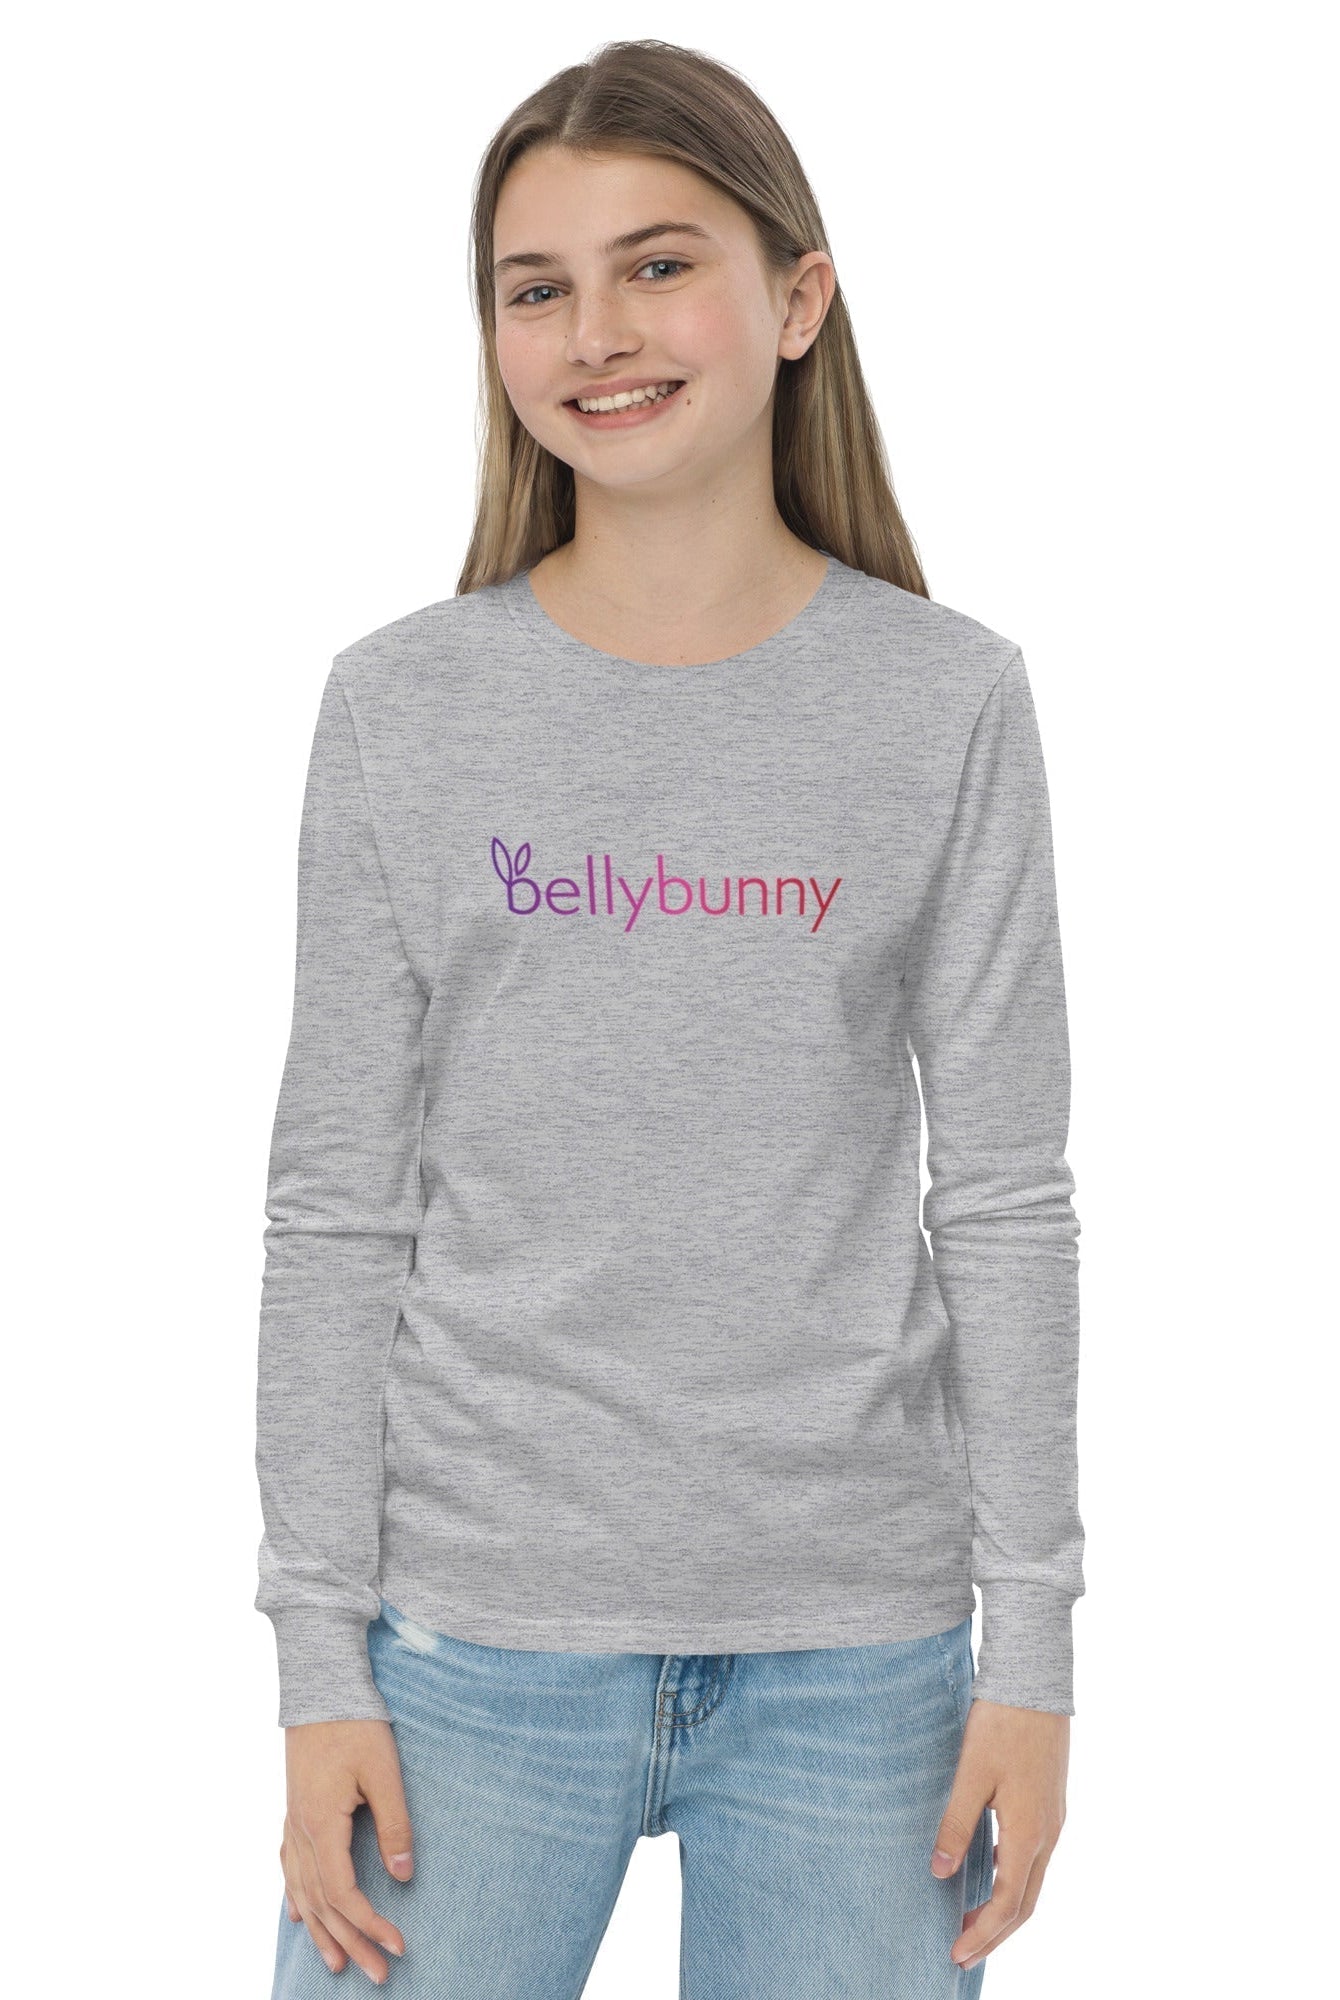 Bellybunny-Youth Long Sleeve T-Shirt-